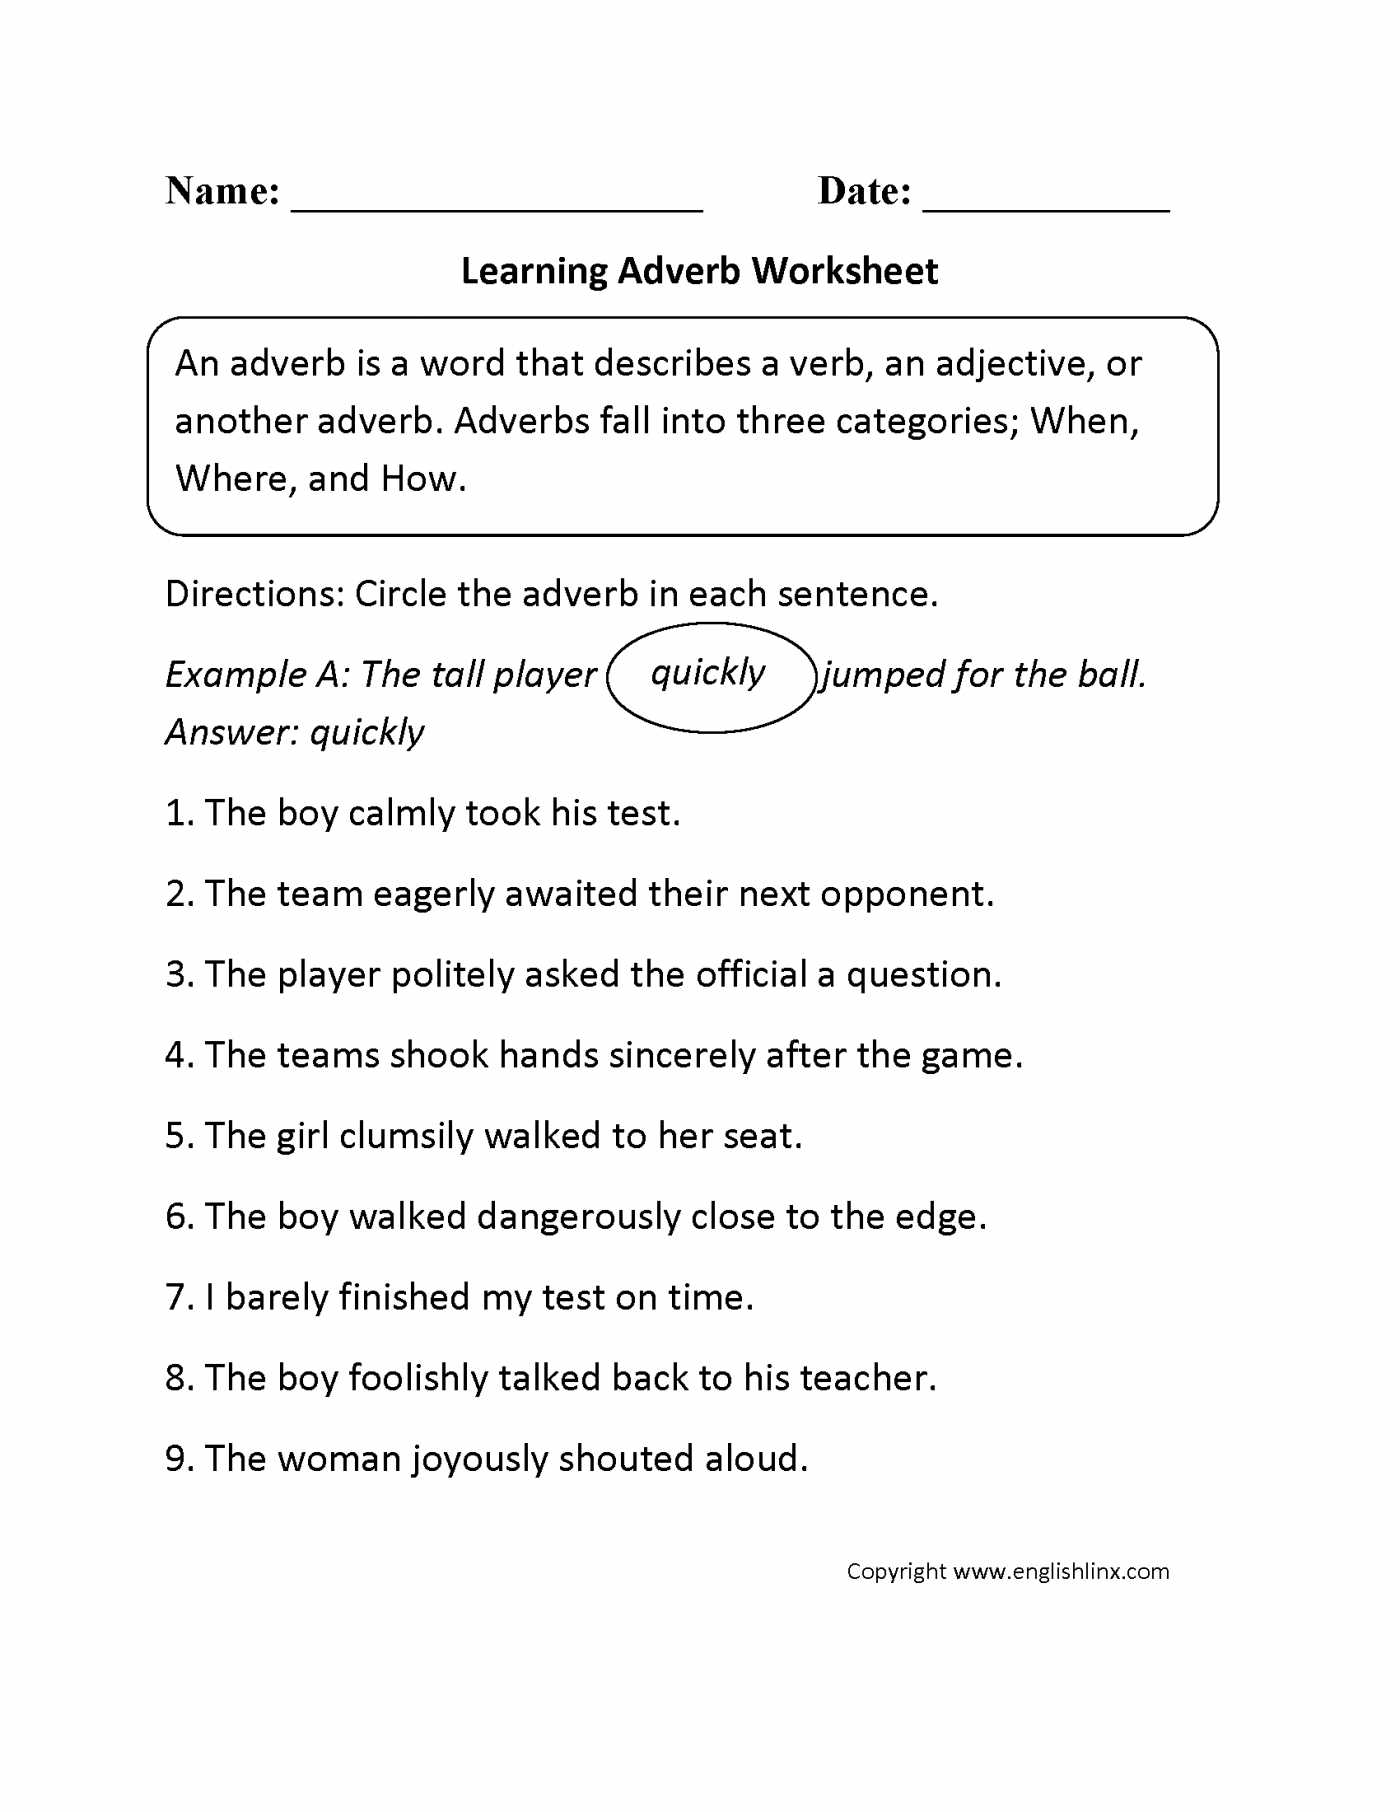 Possessive Adjectives Worksheet Along with Adverbs Frequency Crossword Puzzle Pdf Adverb Warmers Coolers